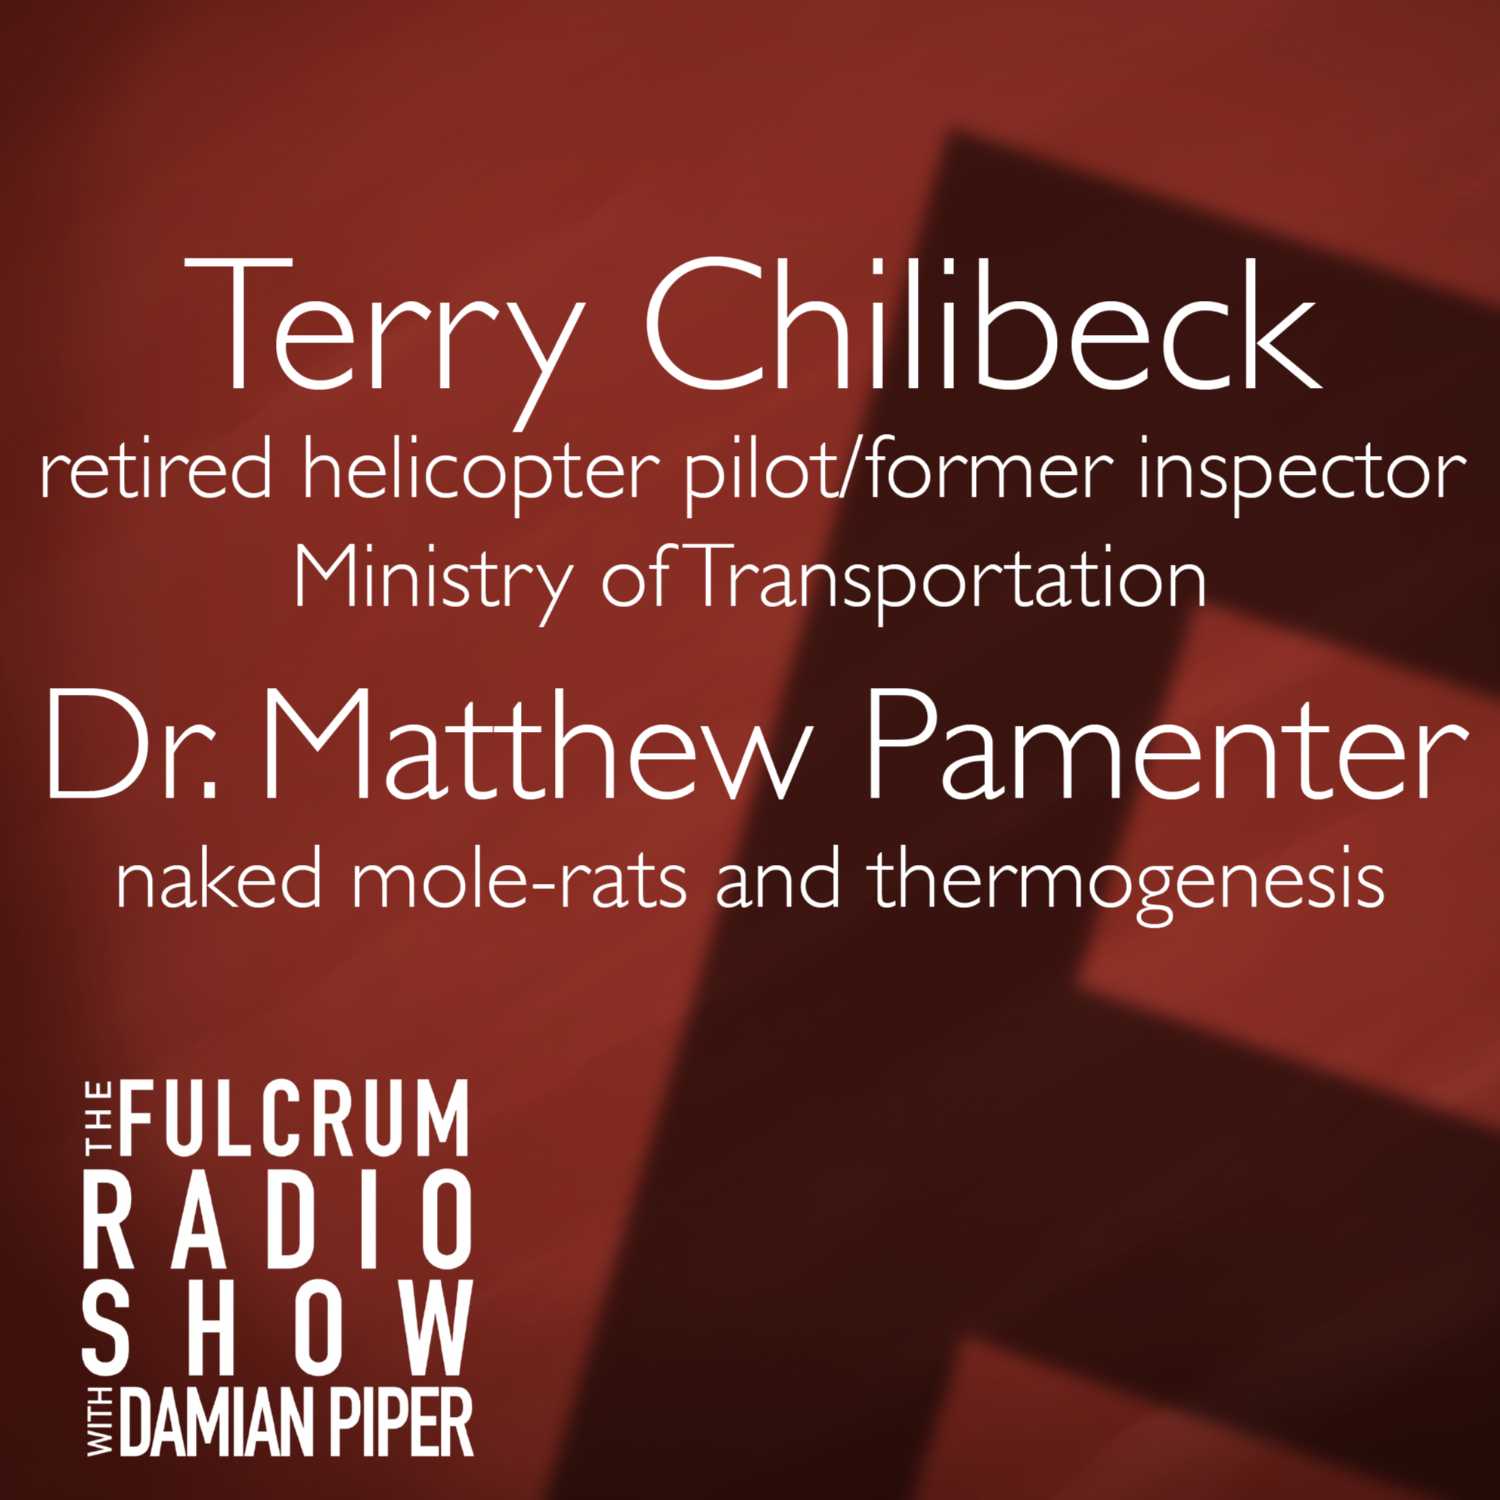 Episode 14: Terry Chilibeck, retired helicopter pilot/former inspector Ministry of Transportation, and Dr. Matthew Pamenter on naked mole-rats